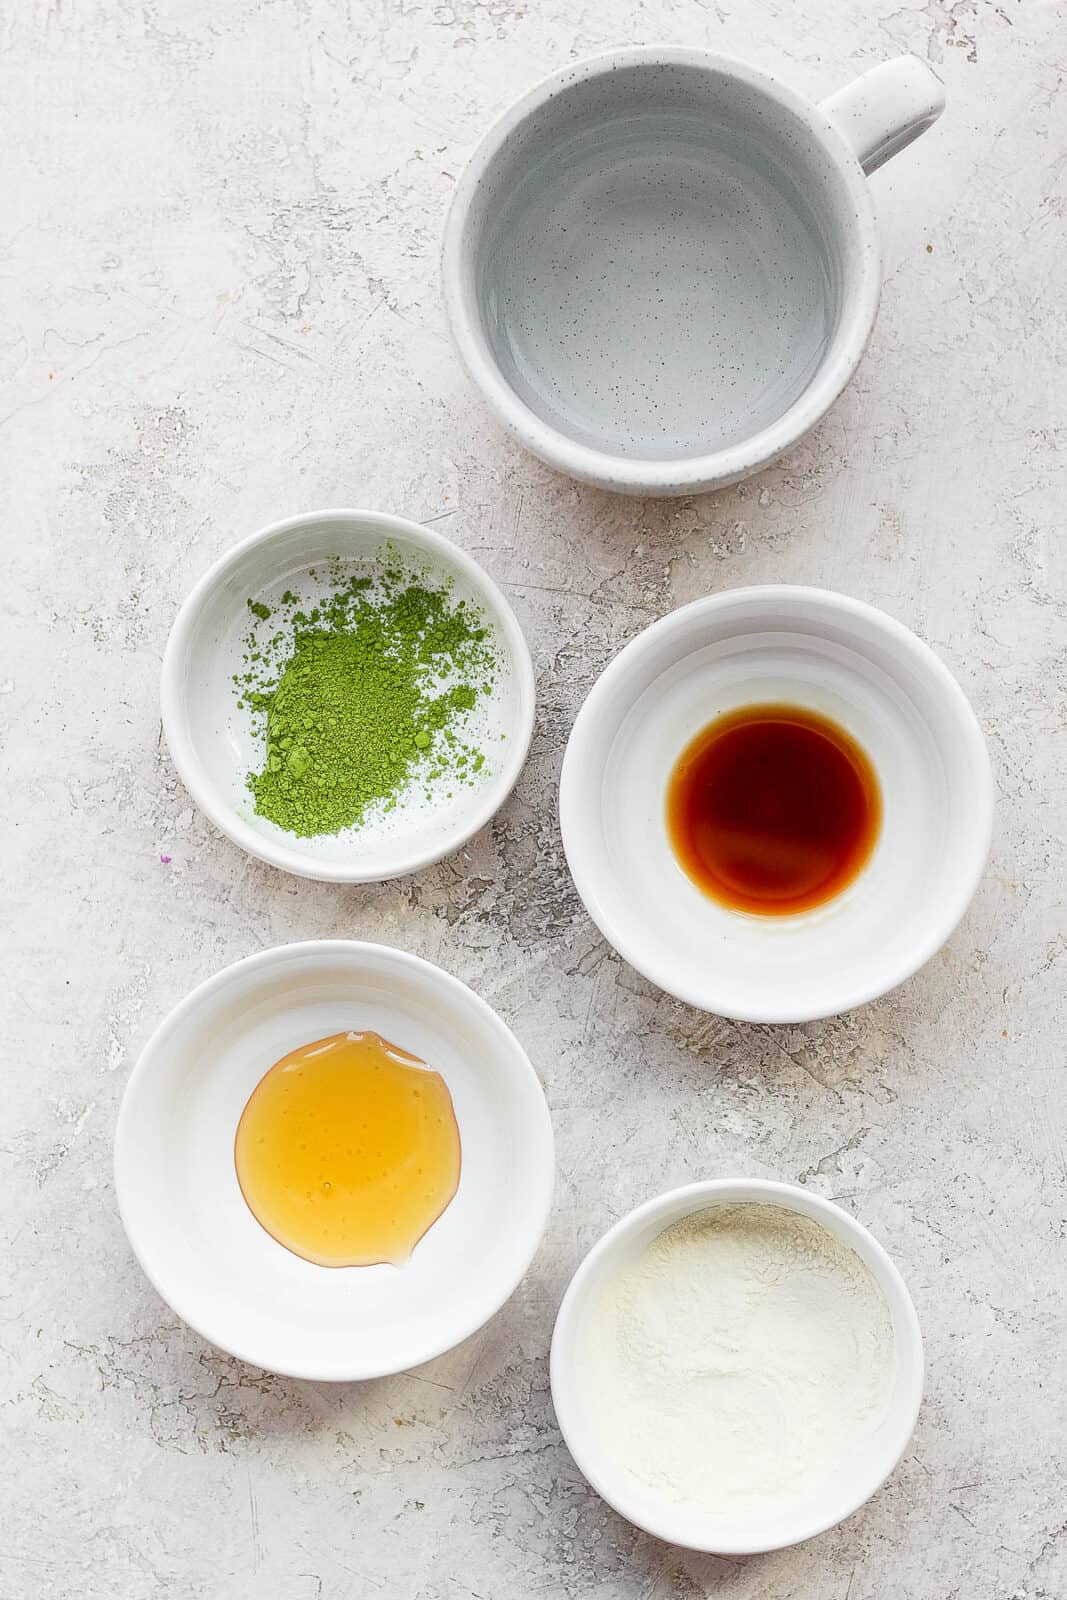 Small bowls filled with ingredients for a matcha latte.